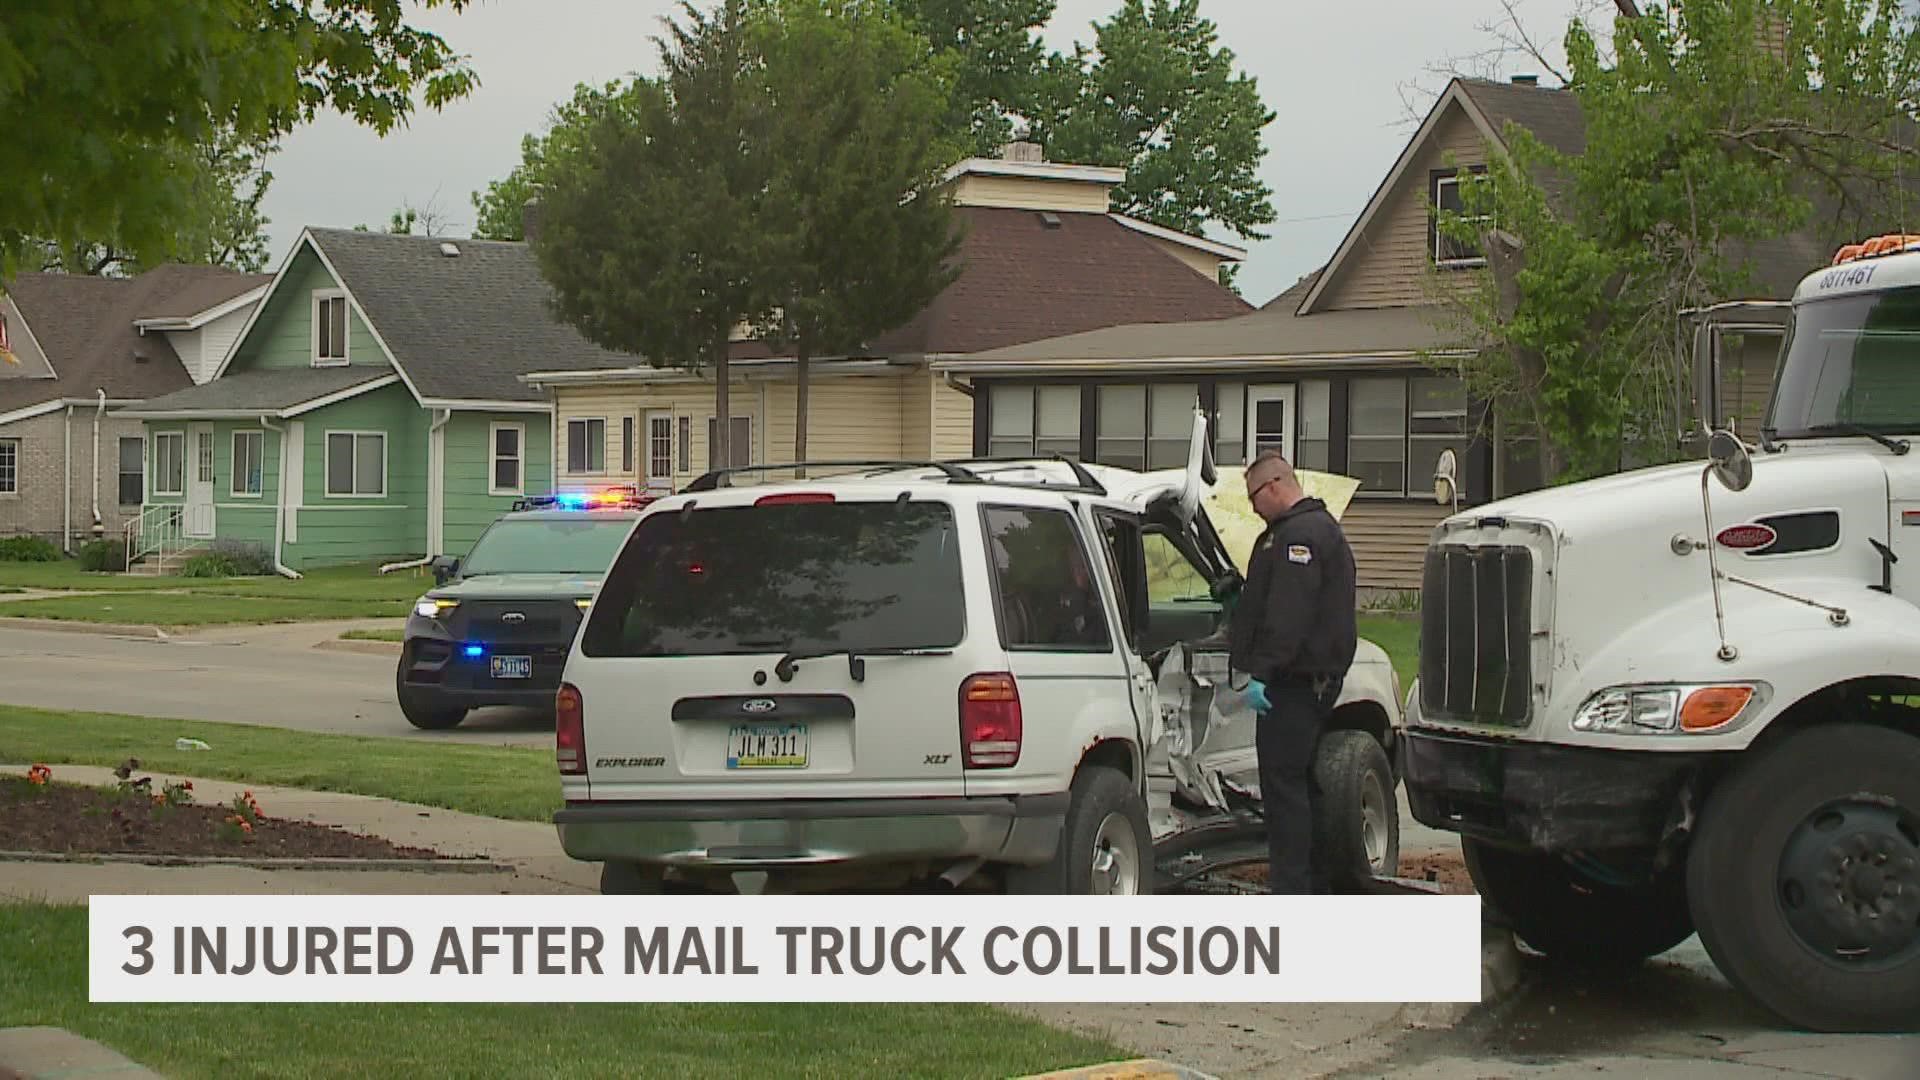 West Des Moines PD said the USPS truck did not stop at a stop sign at 4th and Locust streets.